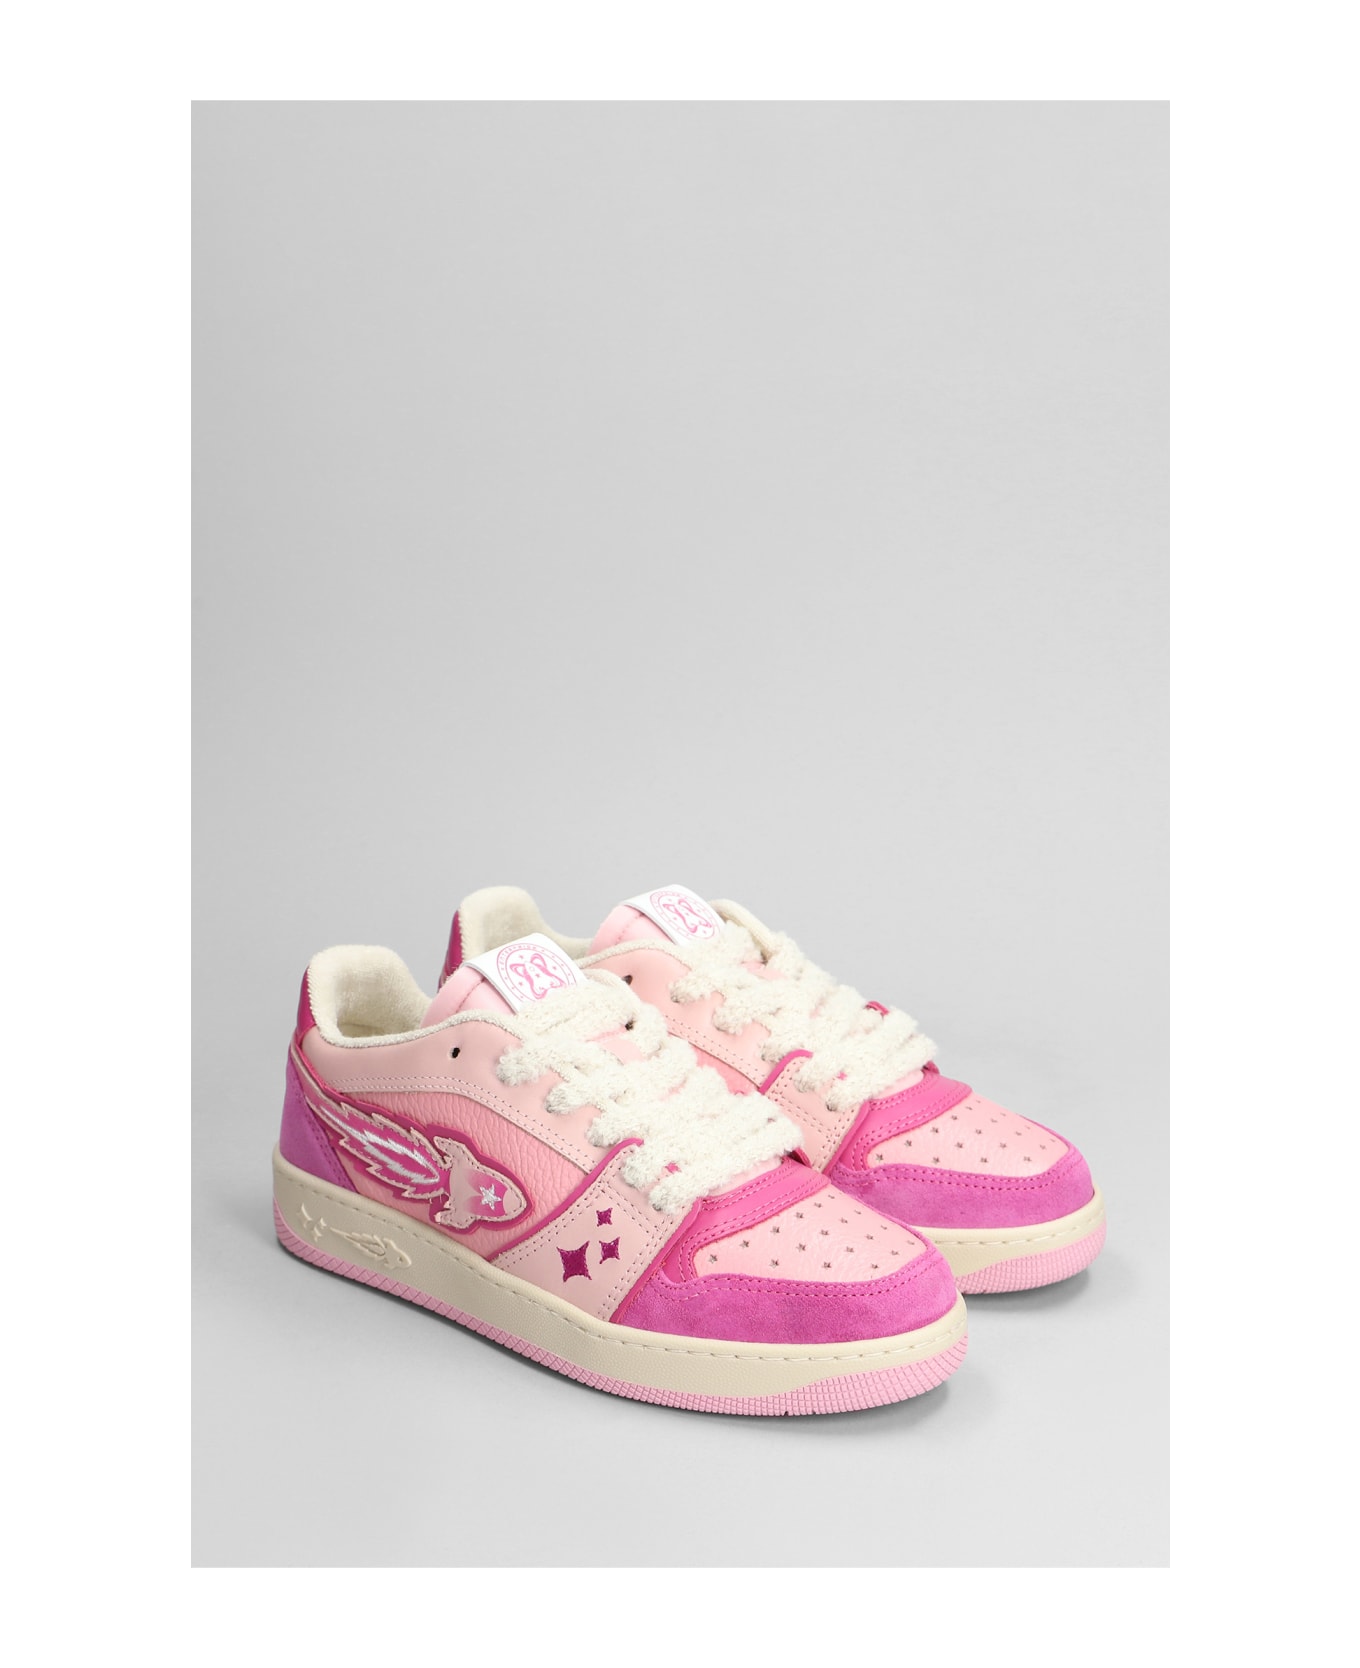 Enterprise Japan Sneakers In Rose-pink Suede And Leather - rose-pink